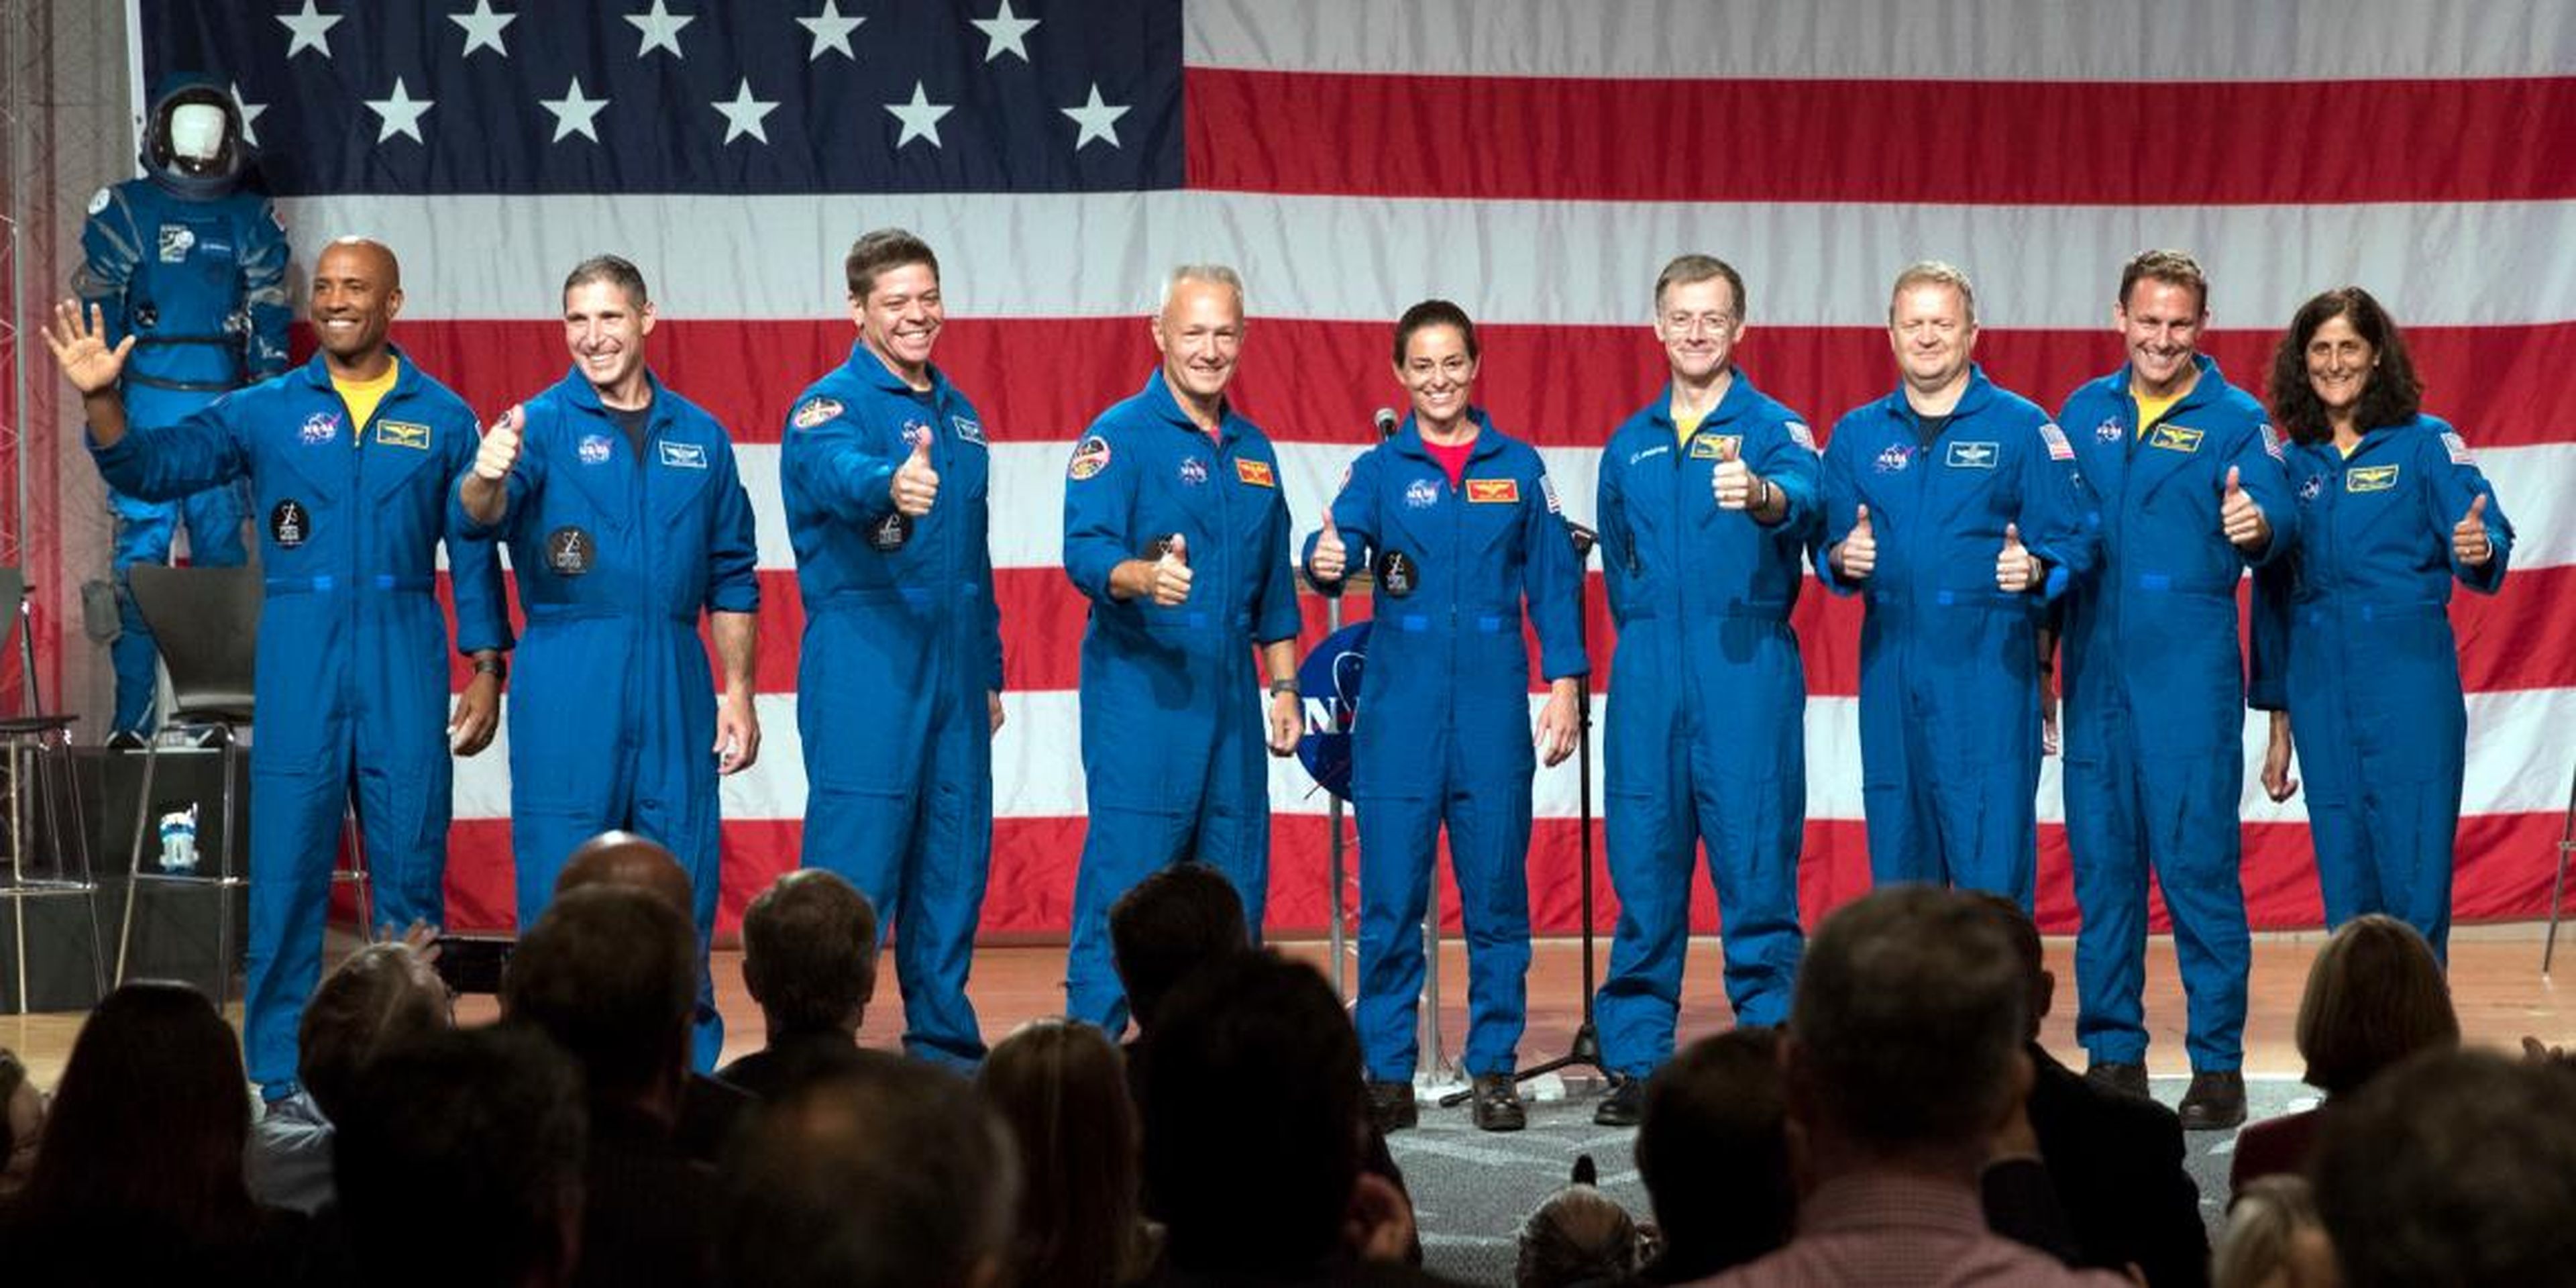 Nine astronauts will fly the first four crewed missions inside SpaceX and Boeing's new spaceships for NASA, called Crew Dragon and CST-100 Starliner, respectively.